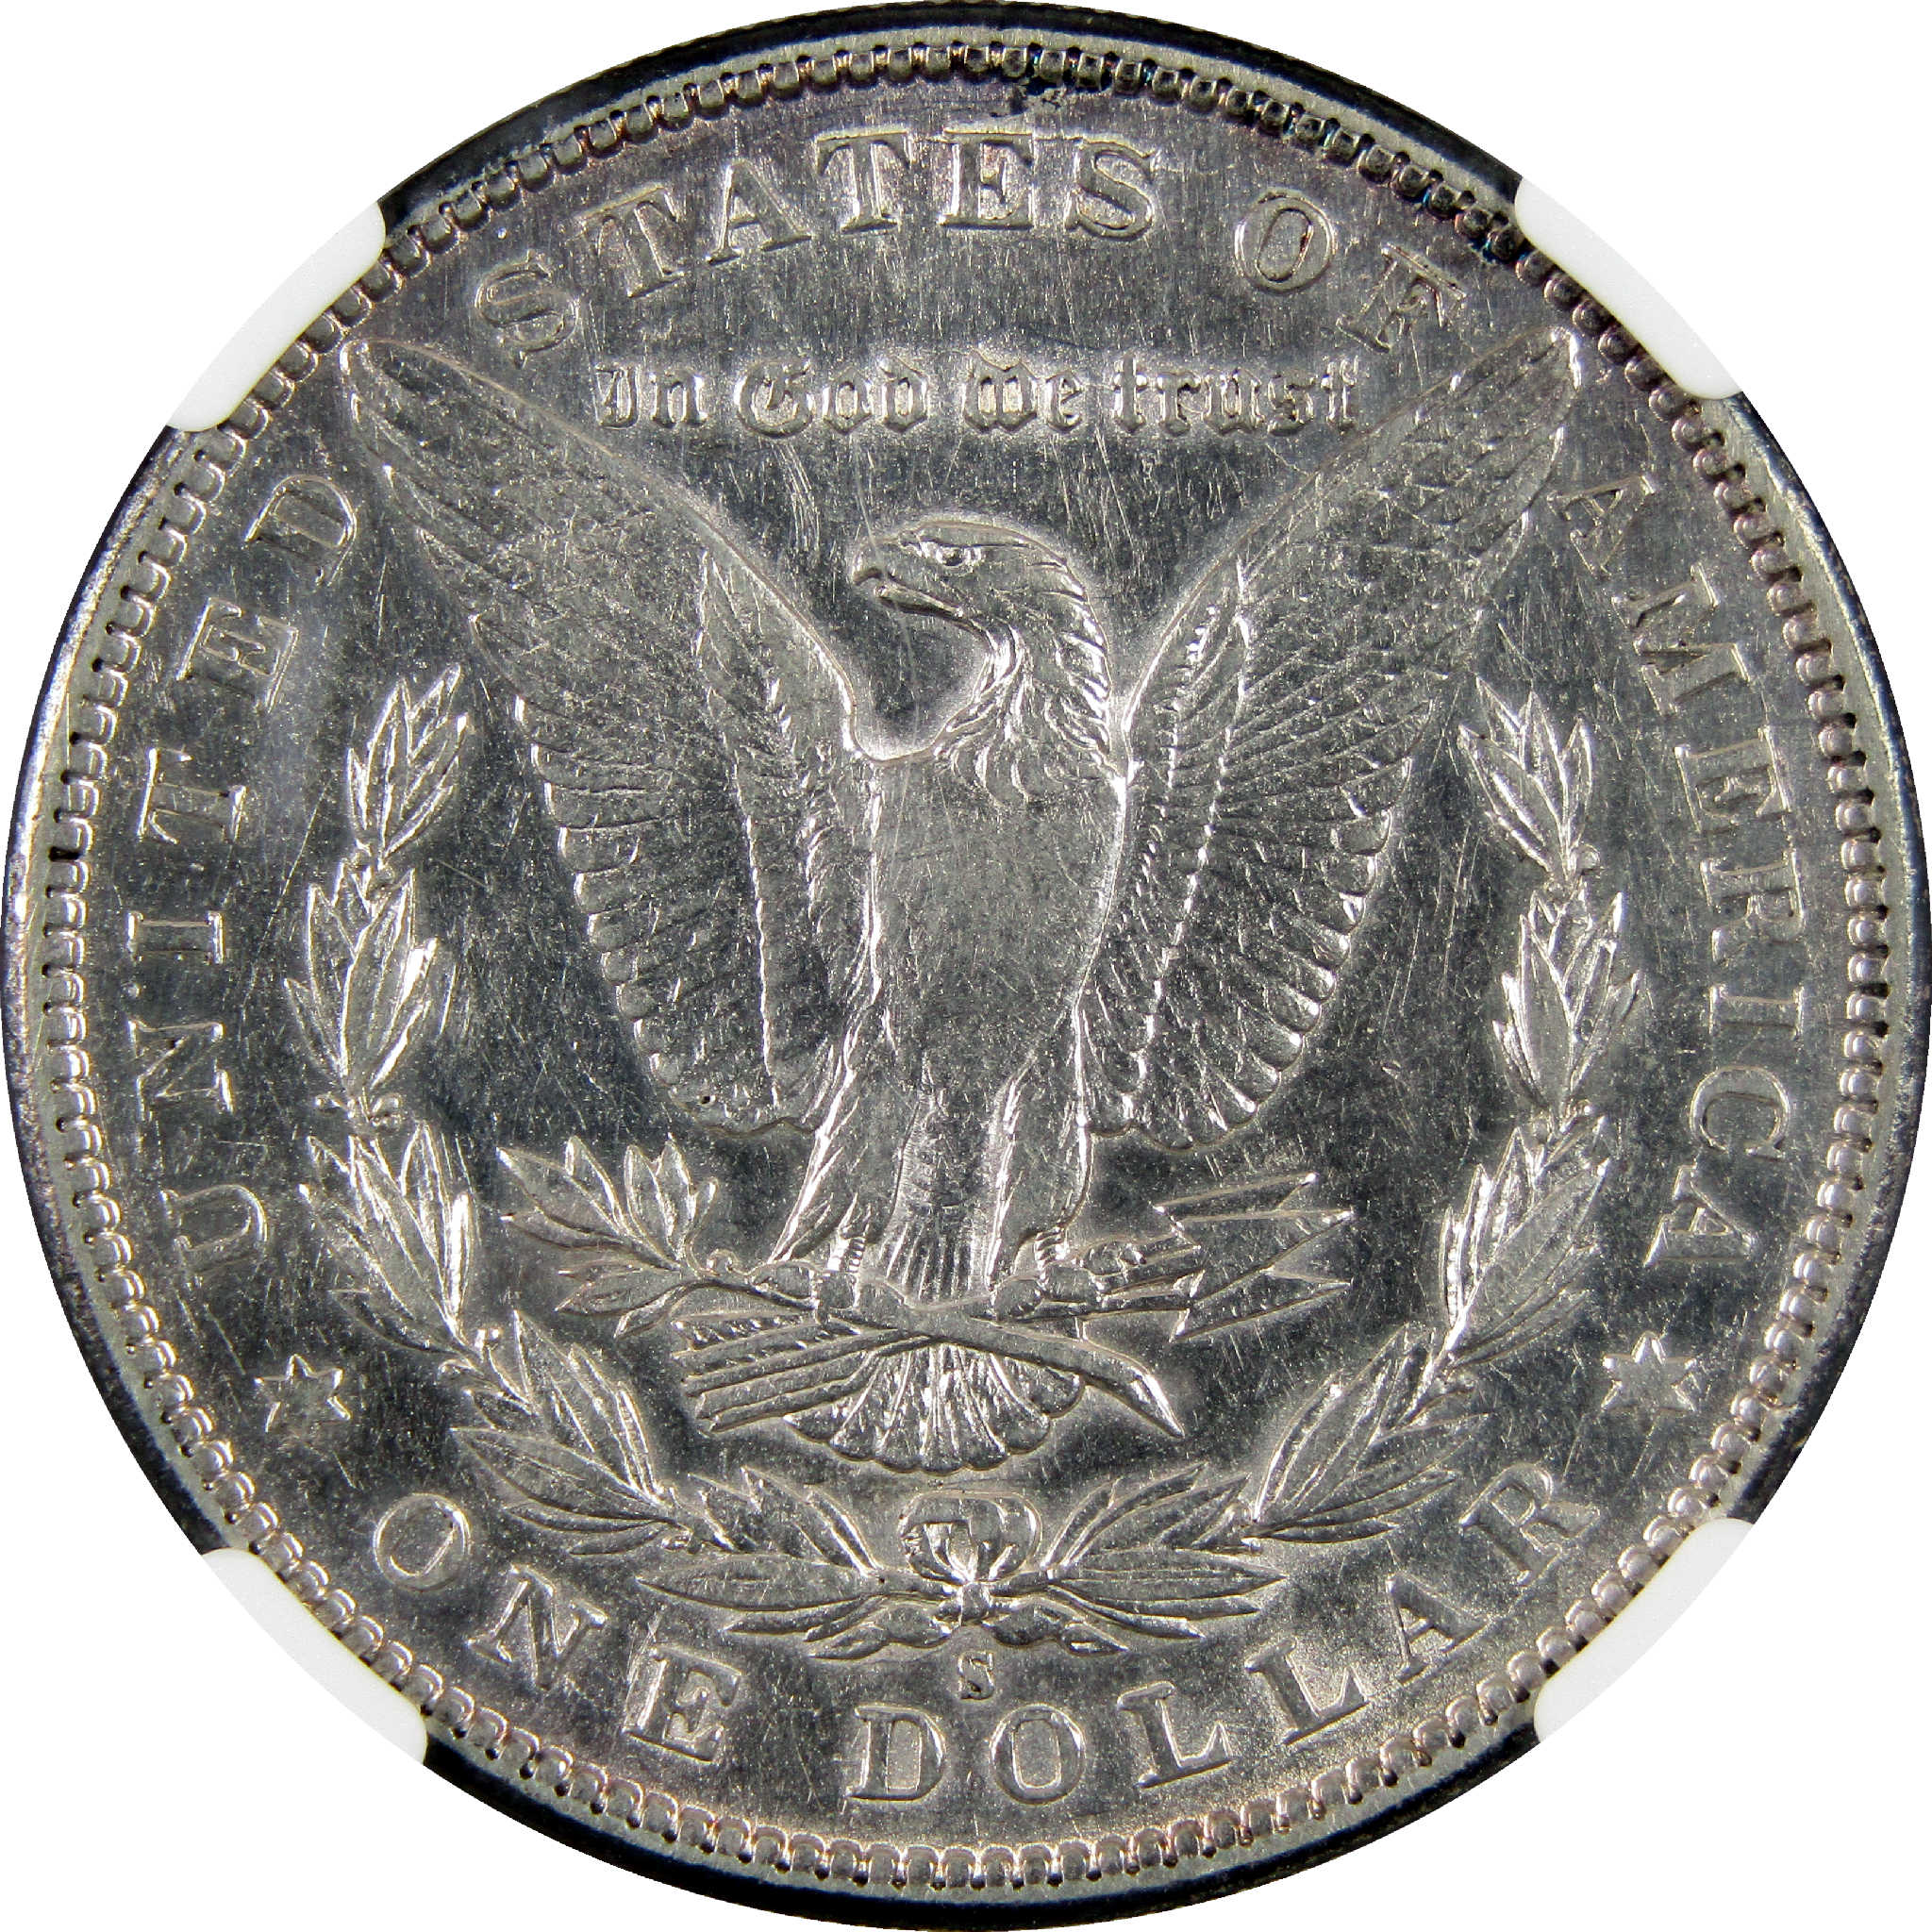 1896 S Morgan Dollar AU Details NGC Silver $1 Coin SKU:I11365 - Morgan coin - Morgan silver dollar - Morgan silver dollar for sale - Profile Coins &amp; Collectibles